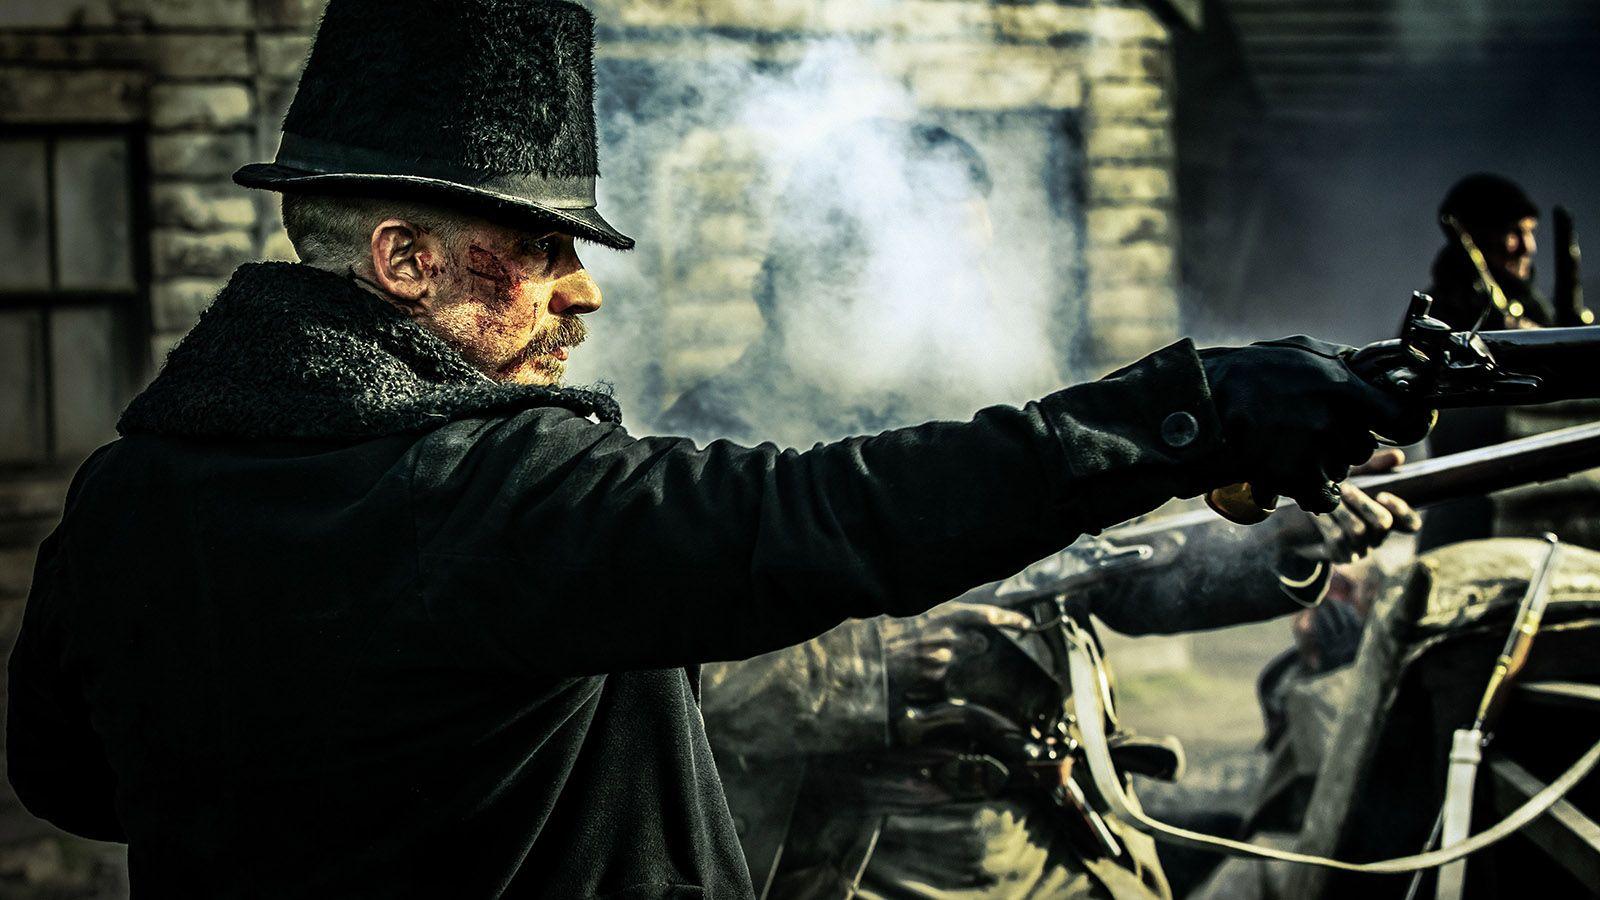 Taboo Trailer The First Look at the TV Series From Tom Hardy and Ridley  Scott